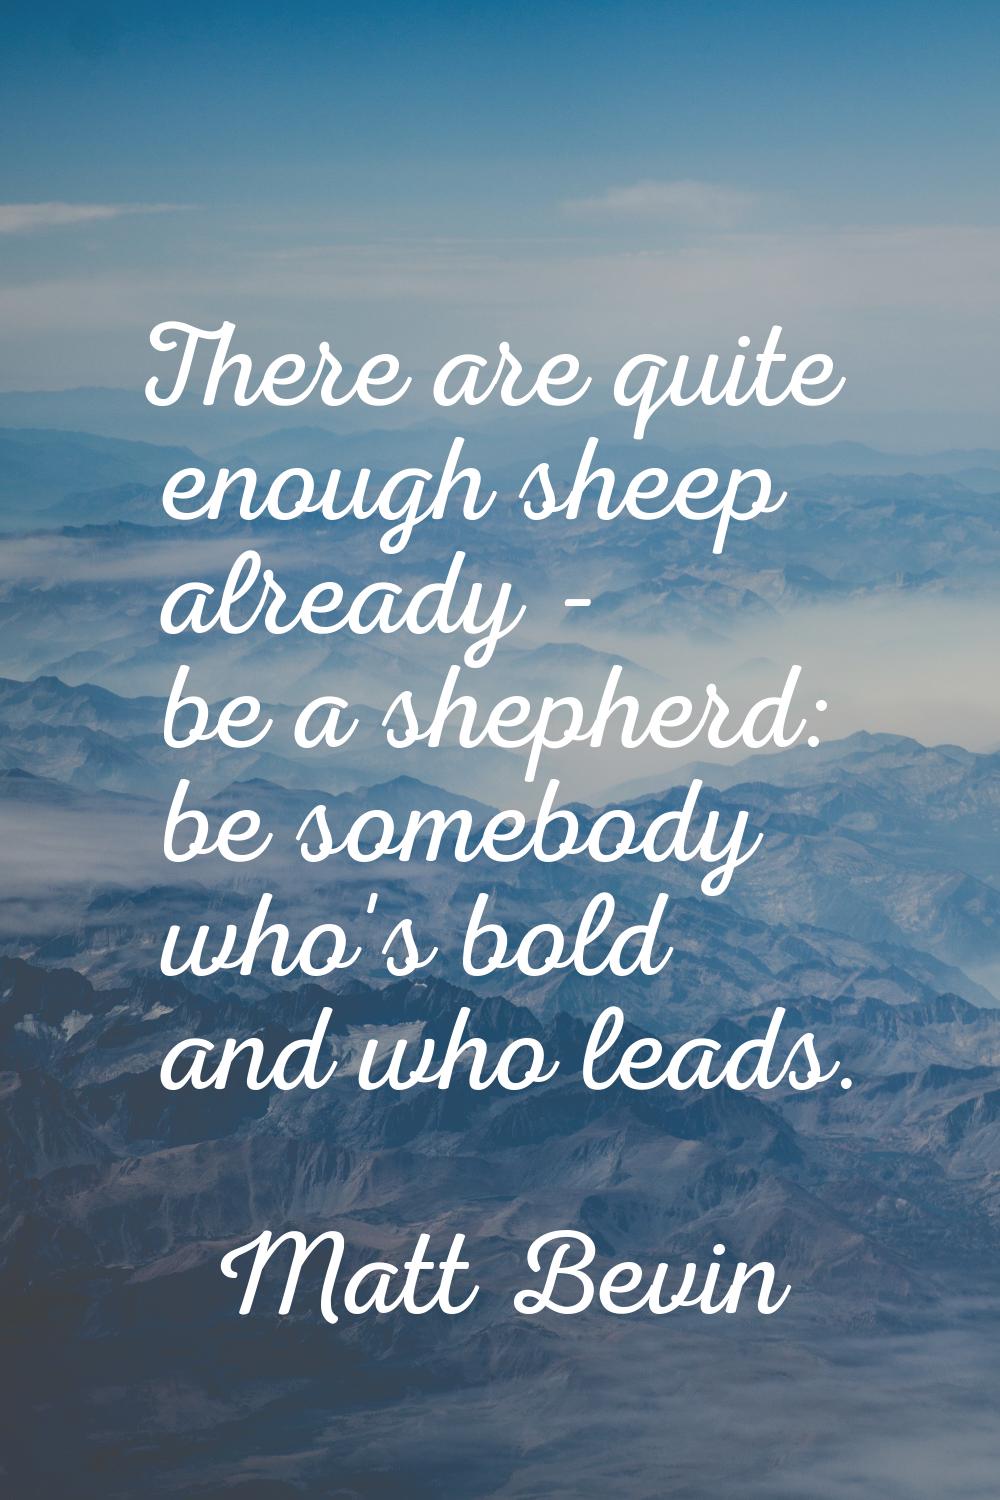 There are quite enough sheep already - be a shepherd: be somebody who's bold and who leads.